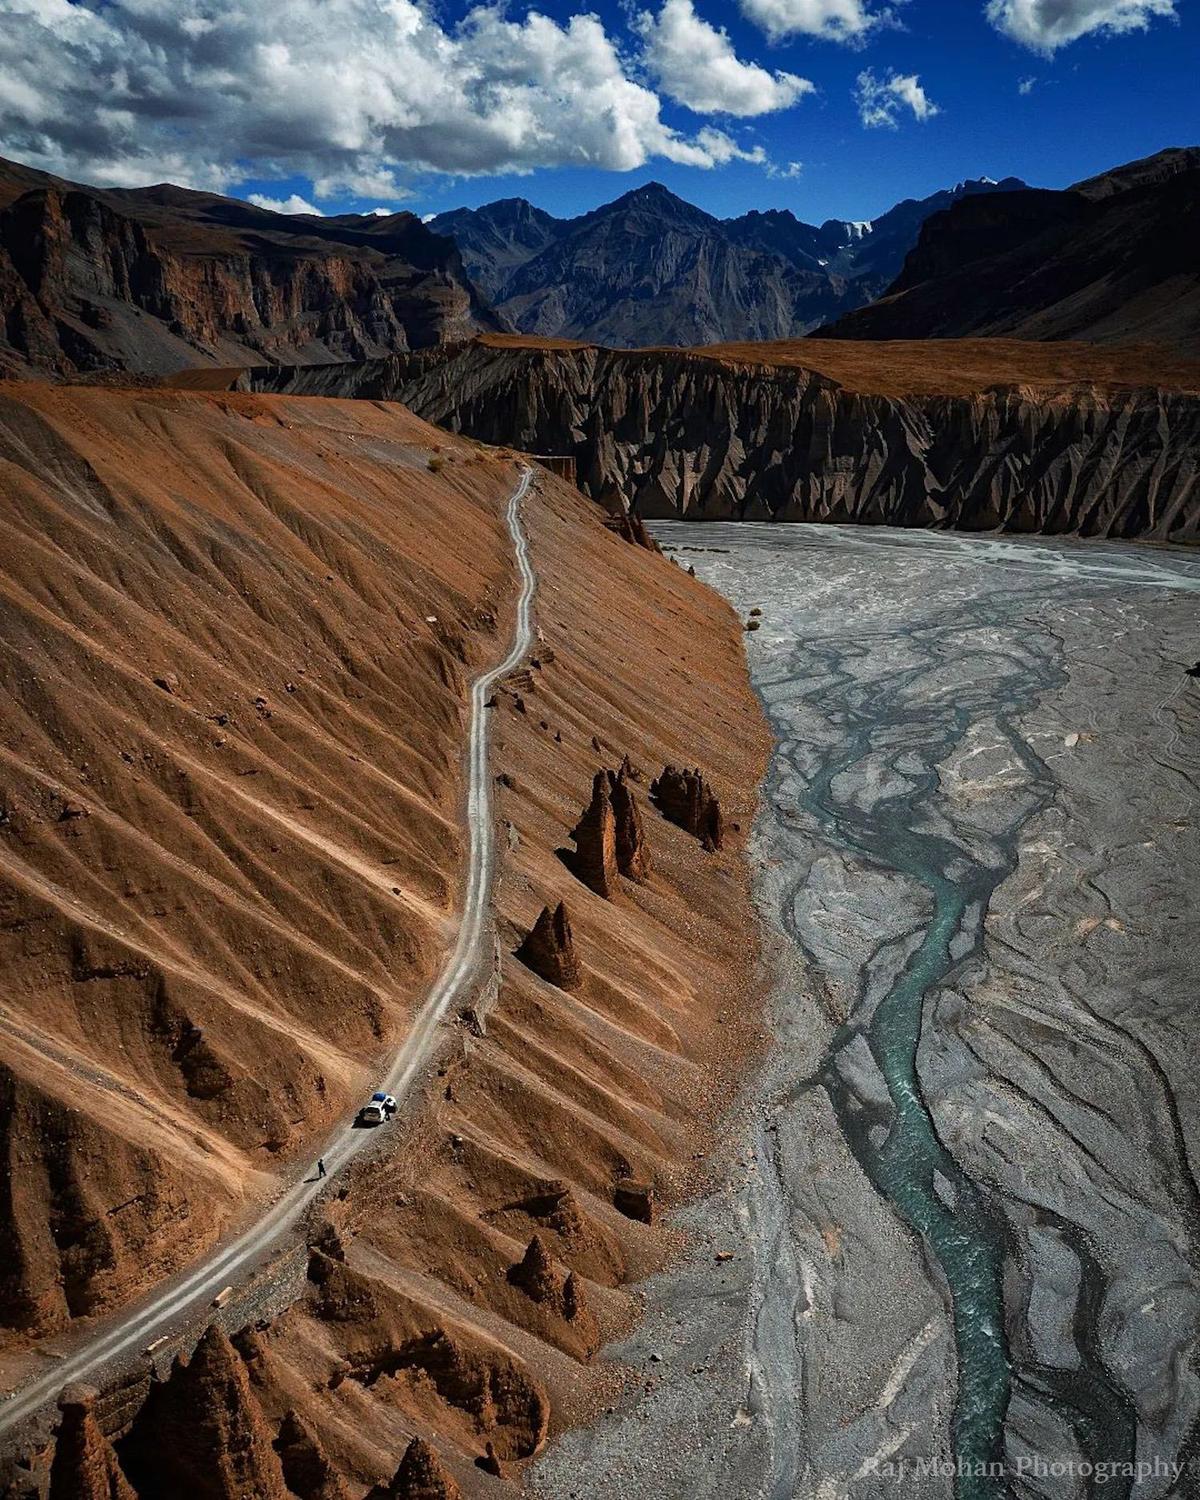 A drive on Mars: The breathtaking roads and landscapes of Spiti, a high-altitude region in the Himalayas. (Courtesy of <a href="https://www.instagram.com/rajography/">Raj Mohan</a>)